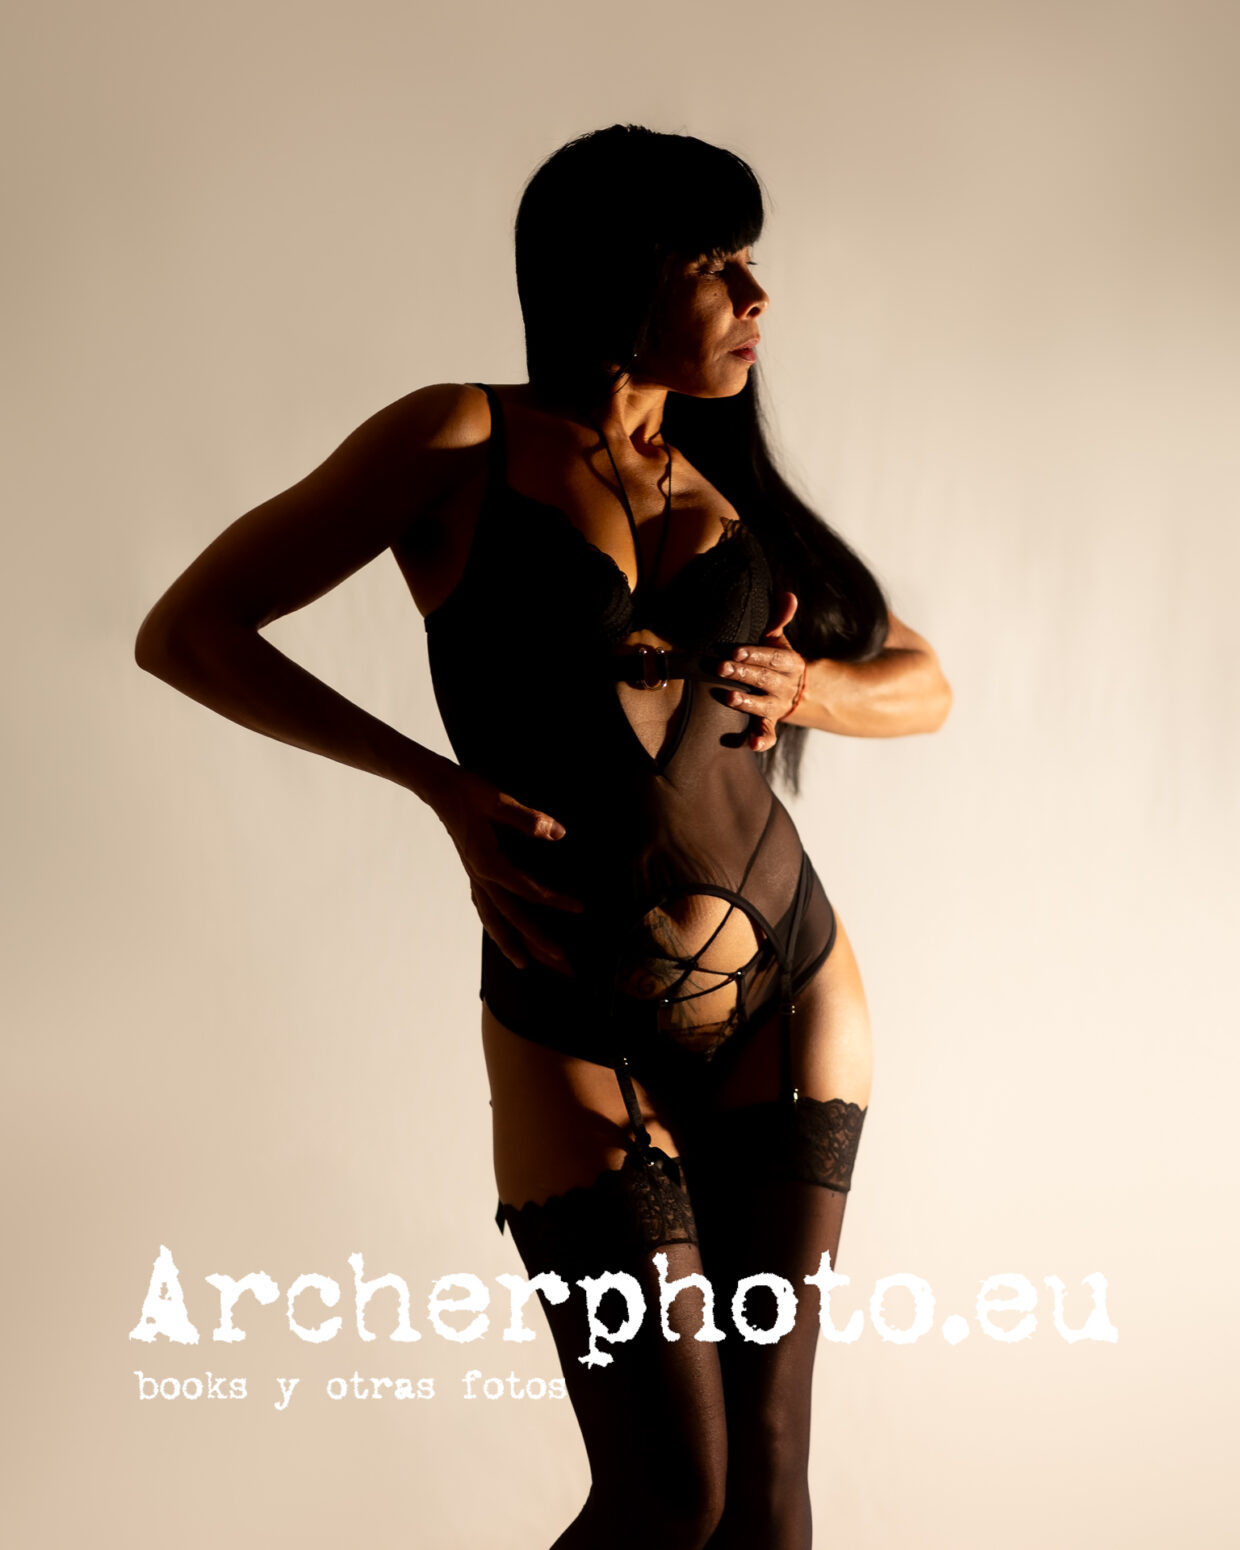 A photo session in 2023 with Quintyka Ques. Pic by Archerphoto, professional photographer in Valencia, Spain. Quintyka, Winter 2023 (3)